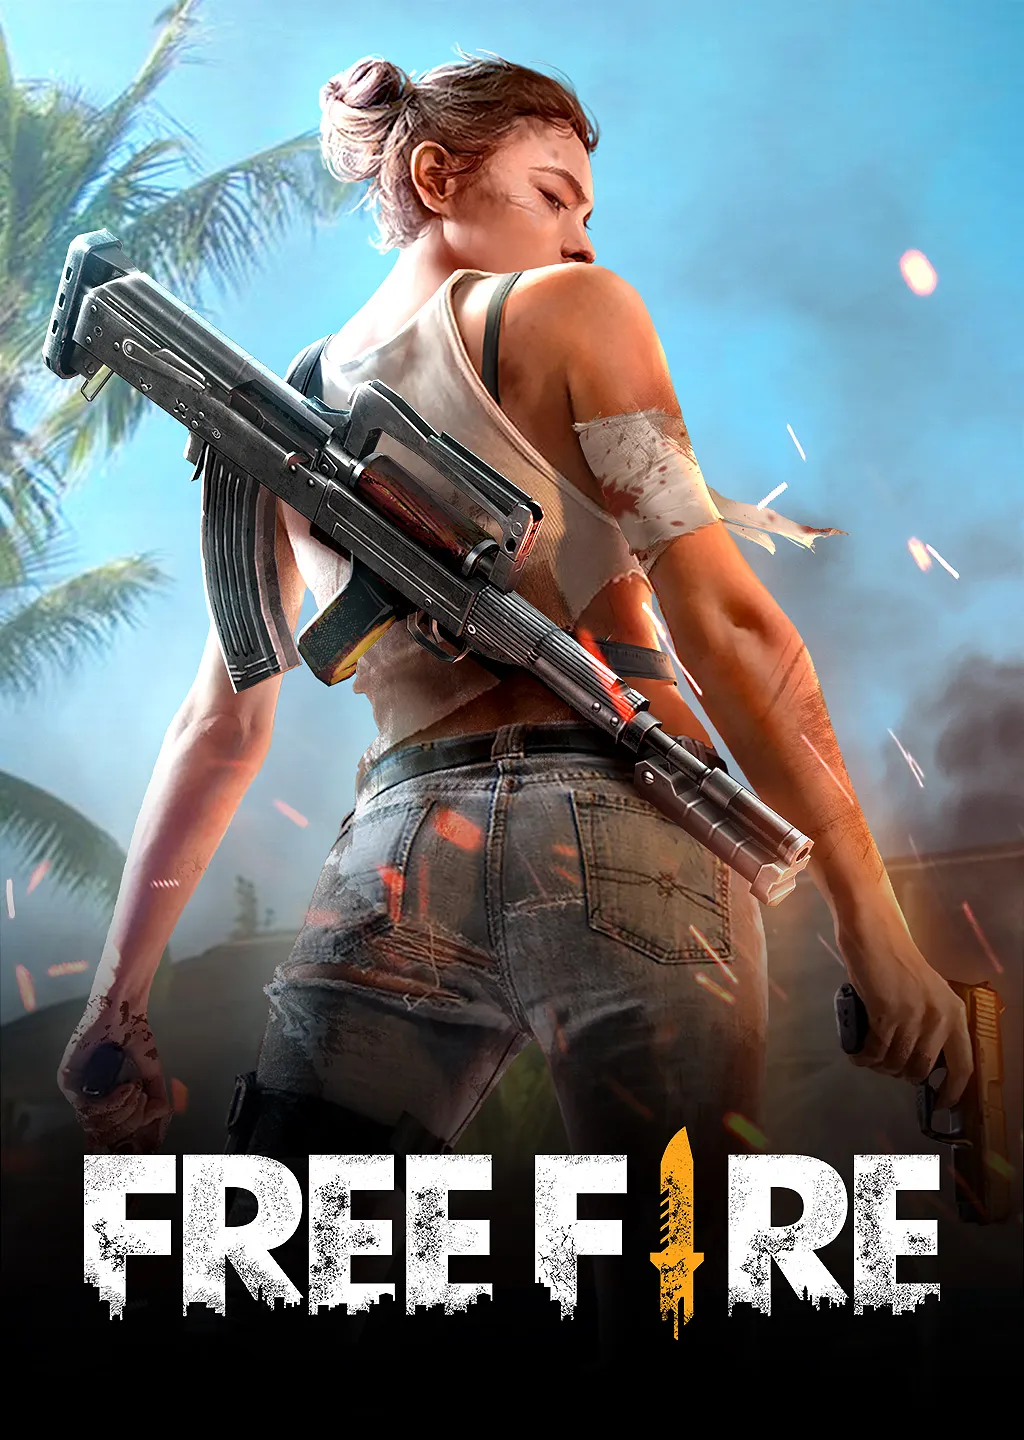 FREE FIRE PLAY STORE MEIN KAB AAYEGA